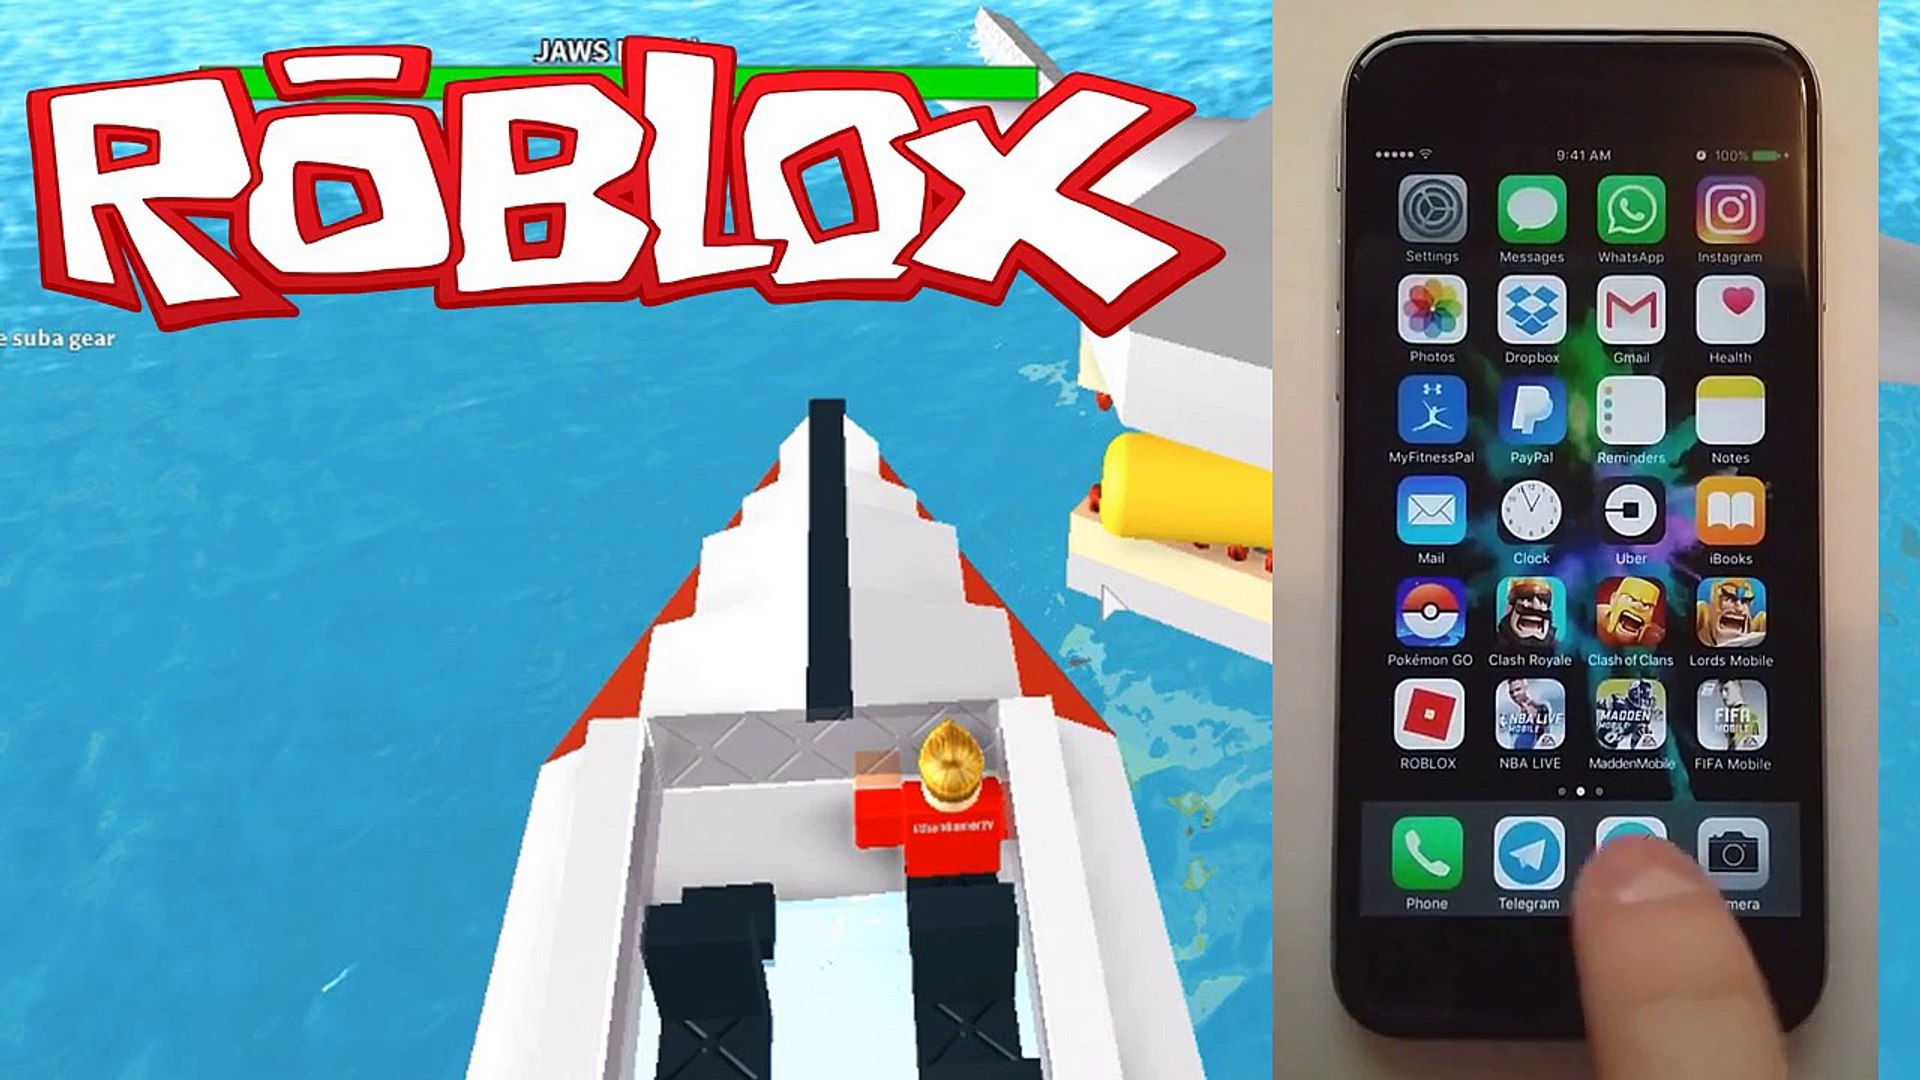 The Easiest Way To Get Free Robux On Roblox Roblox Minigunner Video Dailymotion - roblox minigames videos how to get free robux on a generator